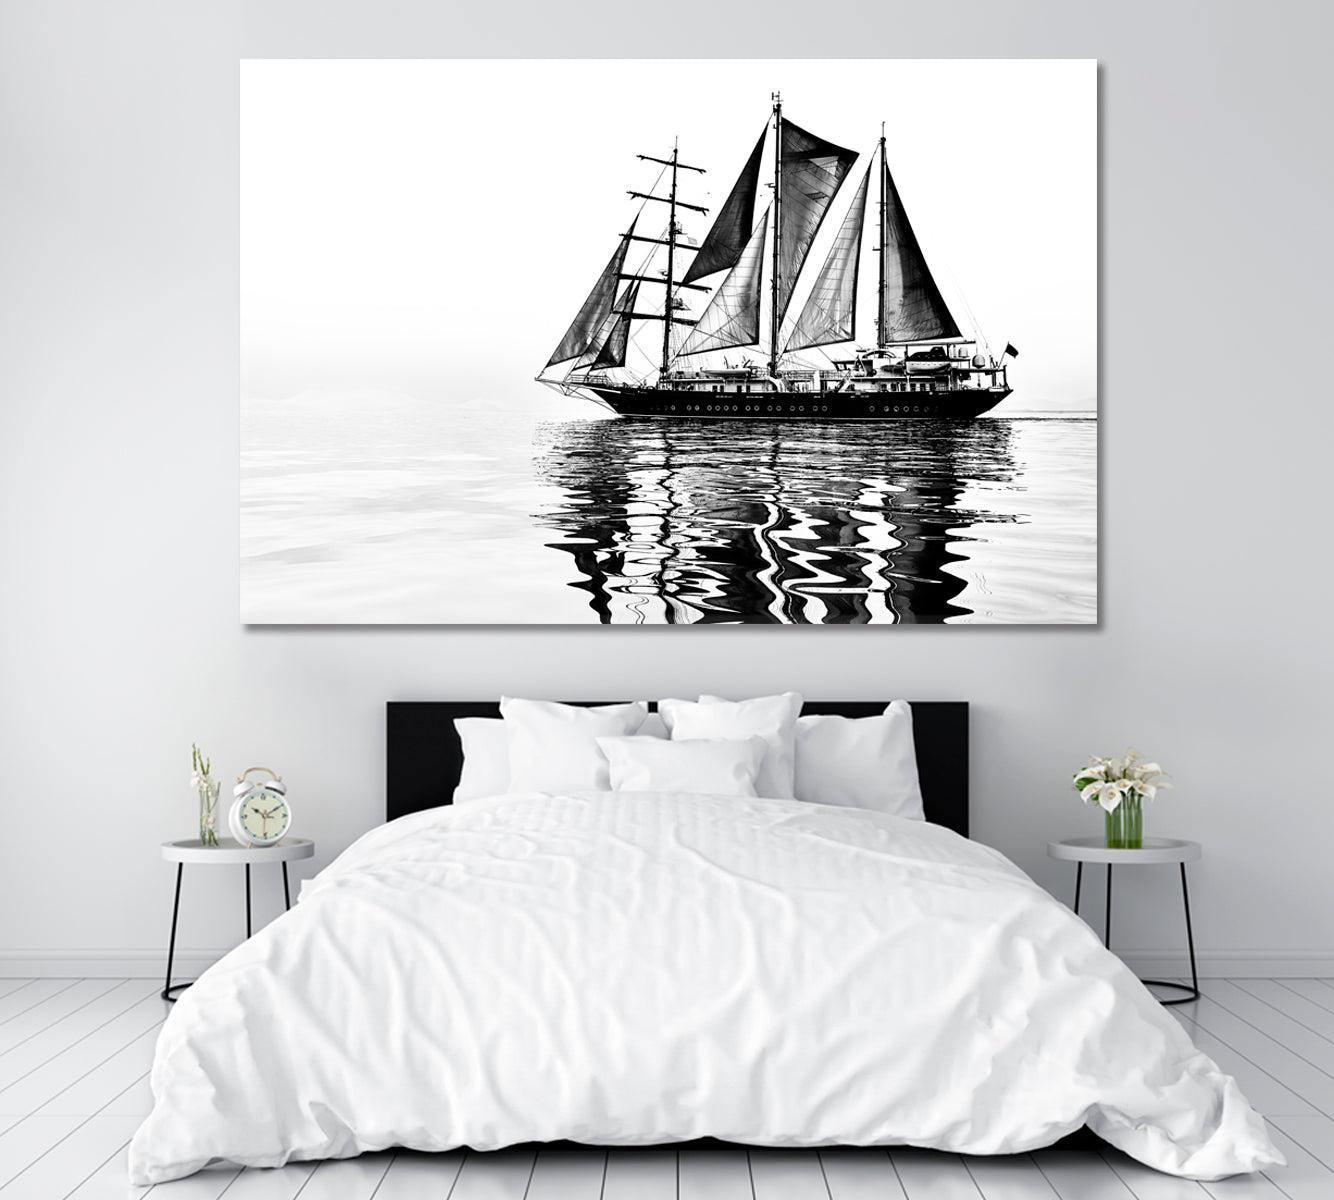 Sailboat in Black and White Canvas Print ArtLexy 1 Panel 24"x16" inches 